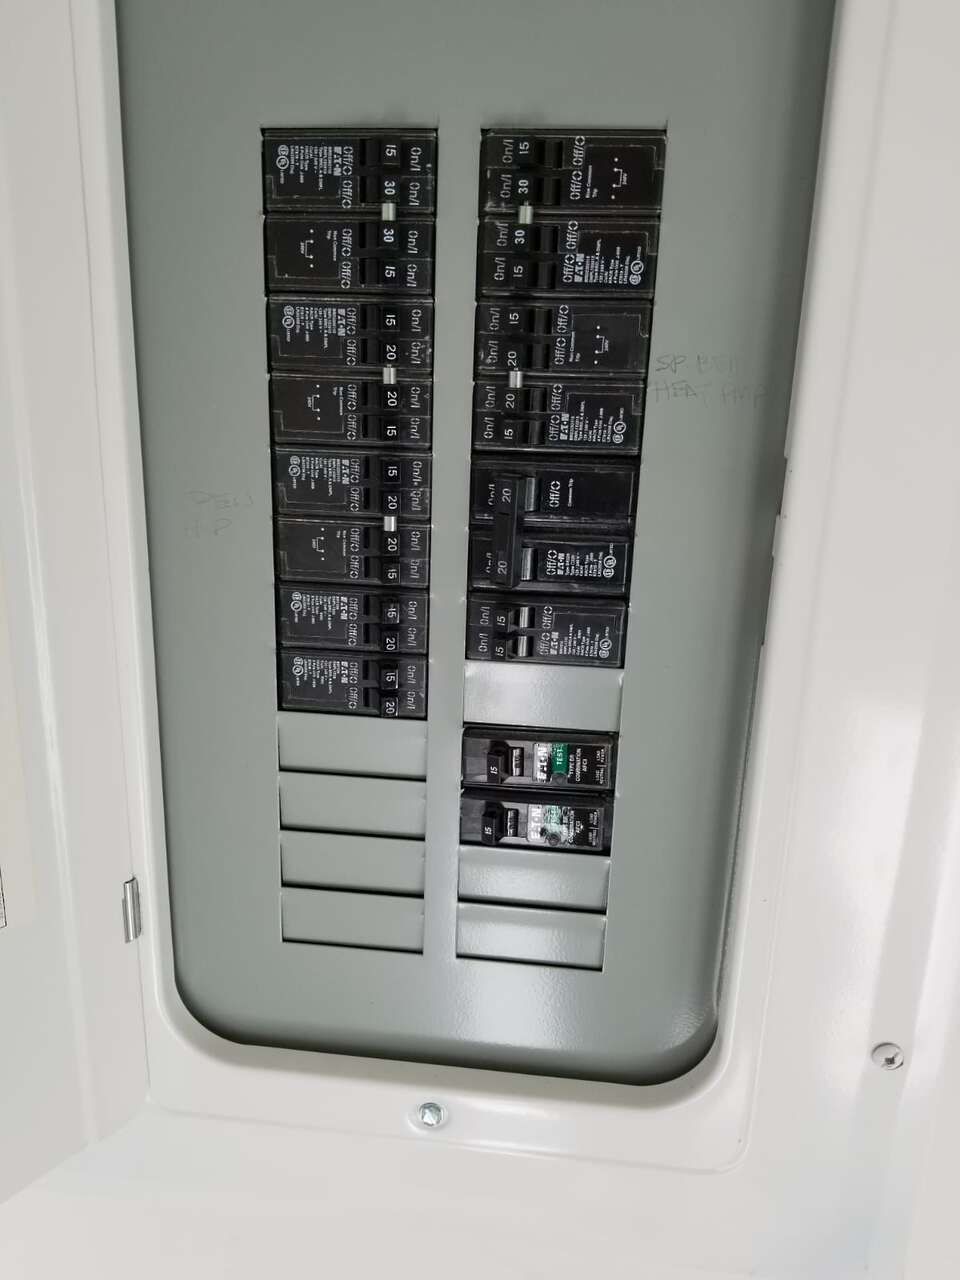 To Upgrade Or Not To Upgrade: Why Are Electric Panel Upgrades Important?